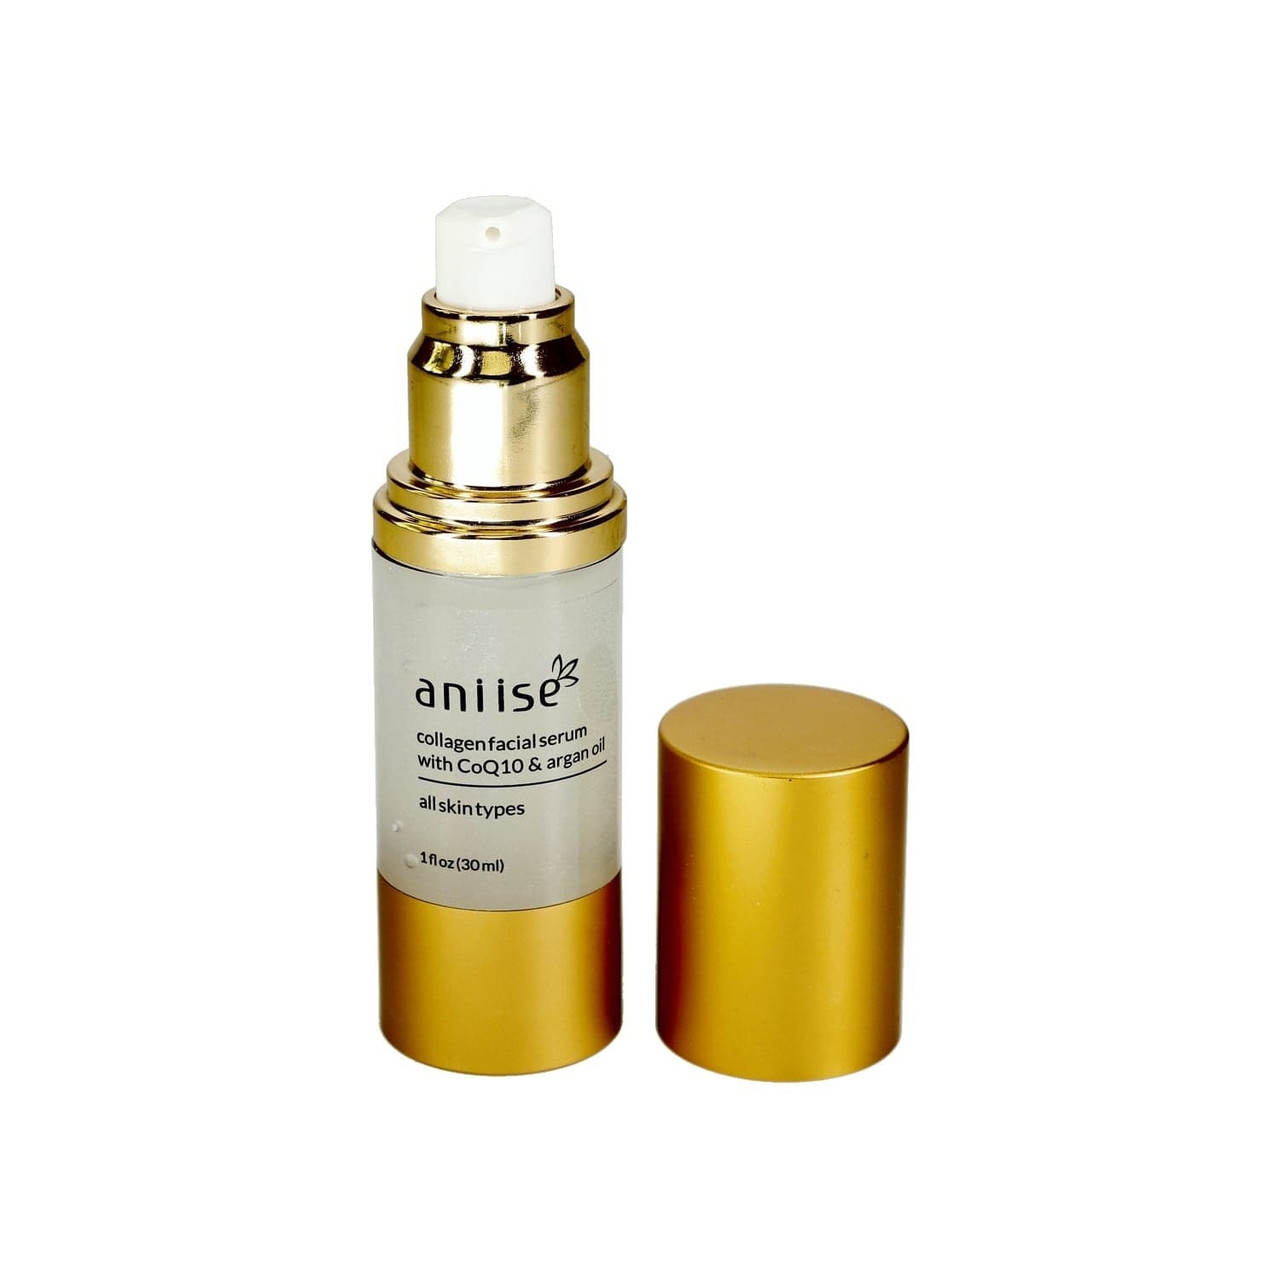 Aniise Collagen Facial Serum With CoQ10 And Argan Oil - 1 oz